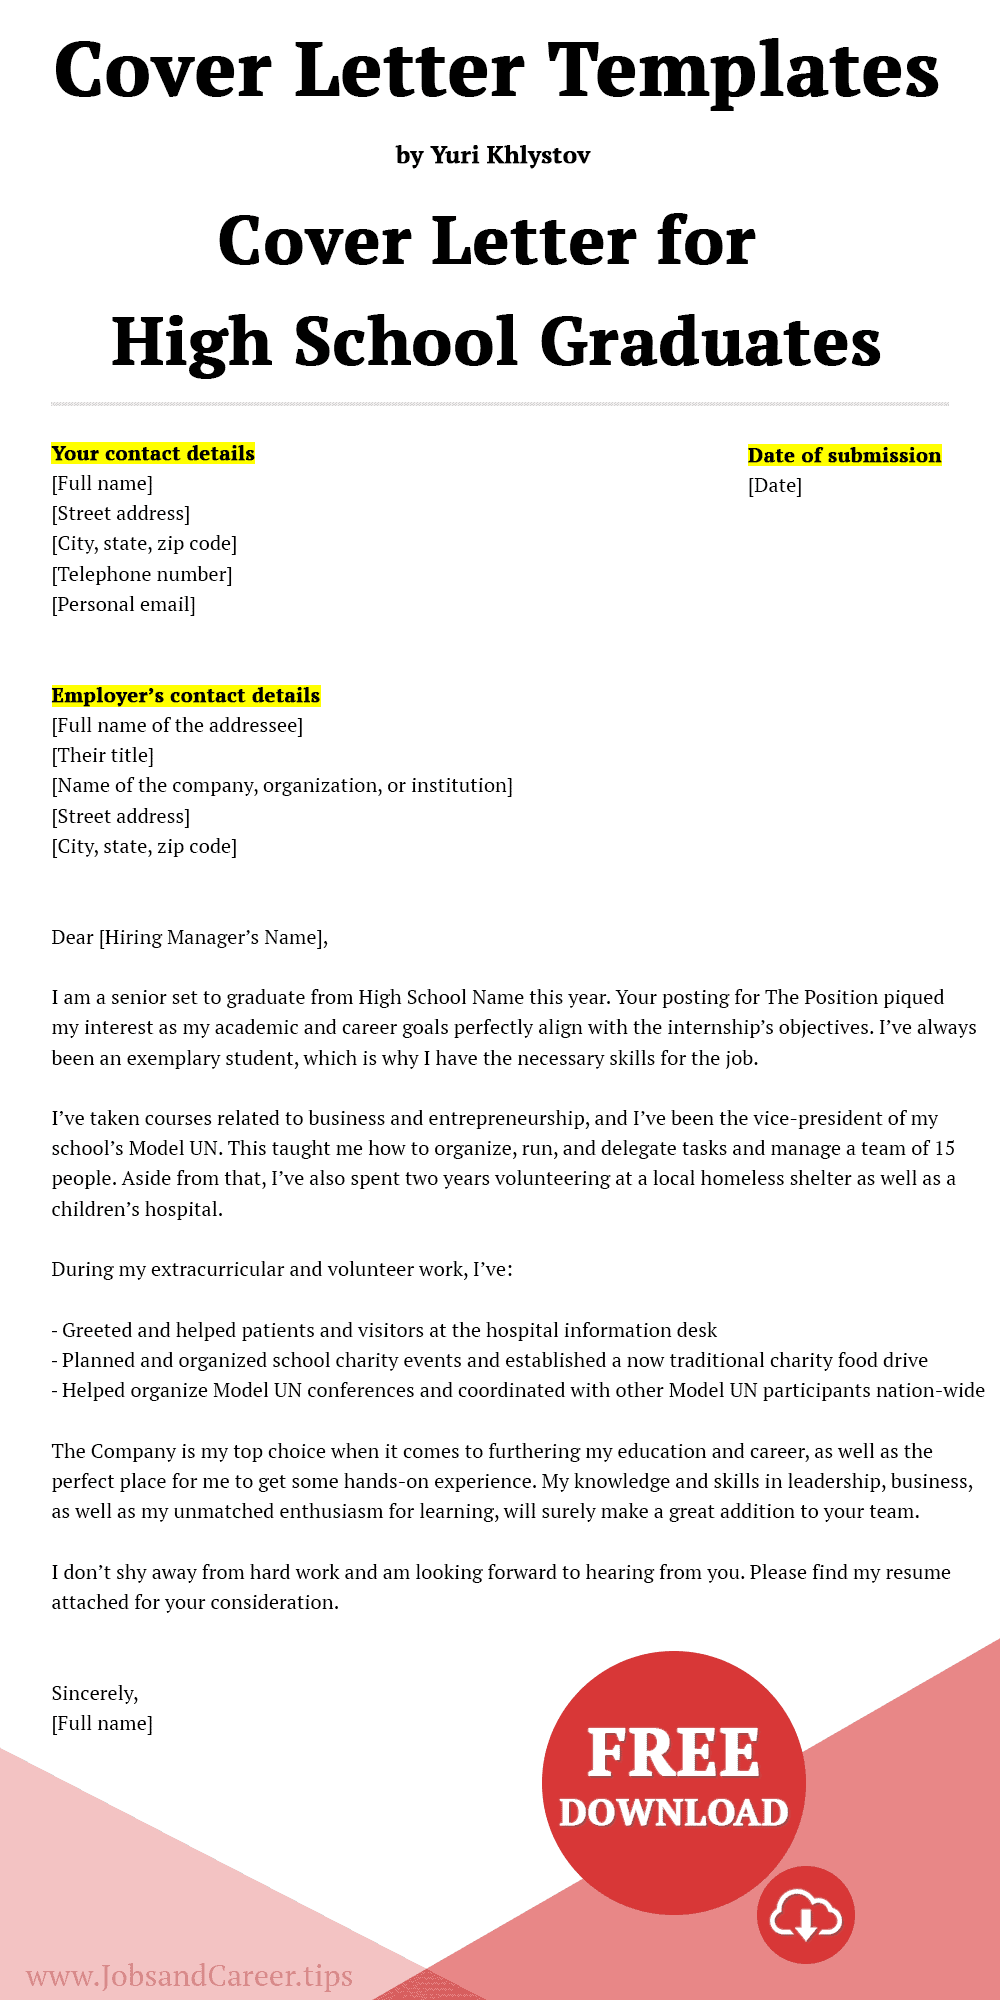 sample cover letter for high school students